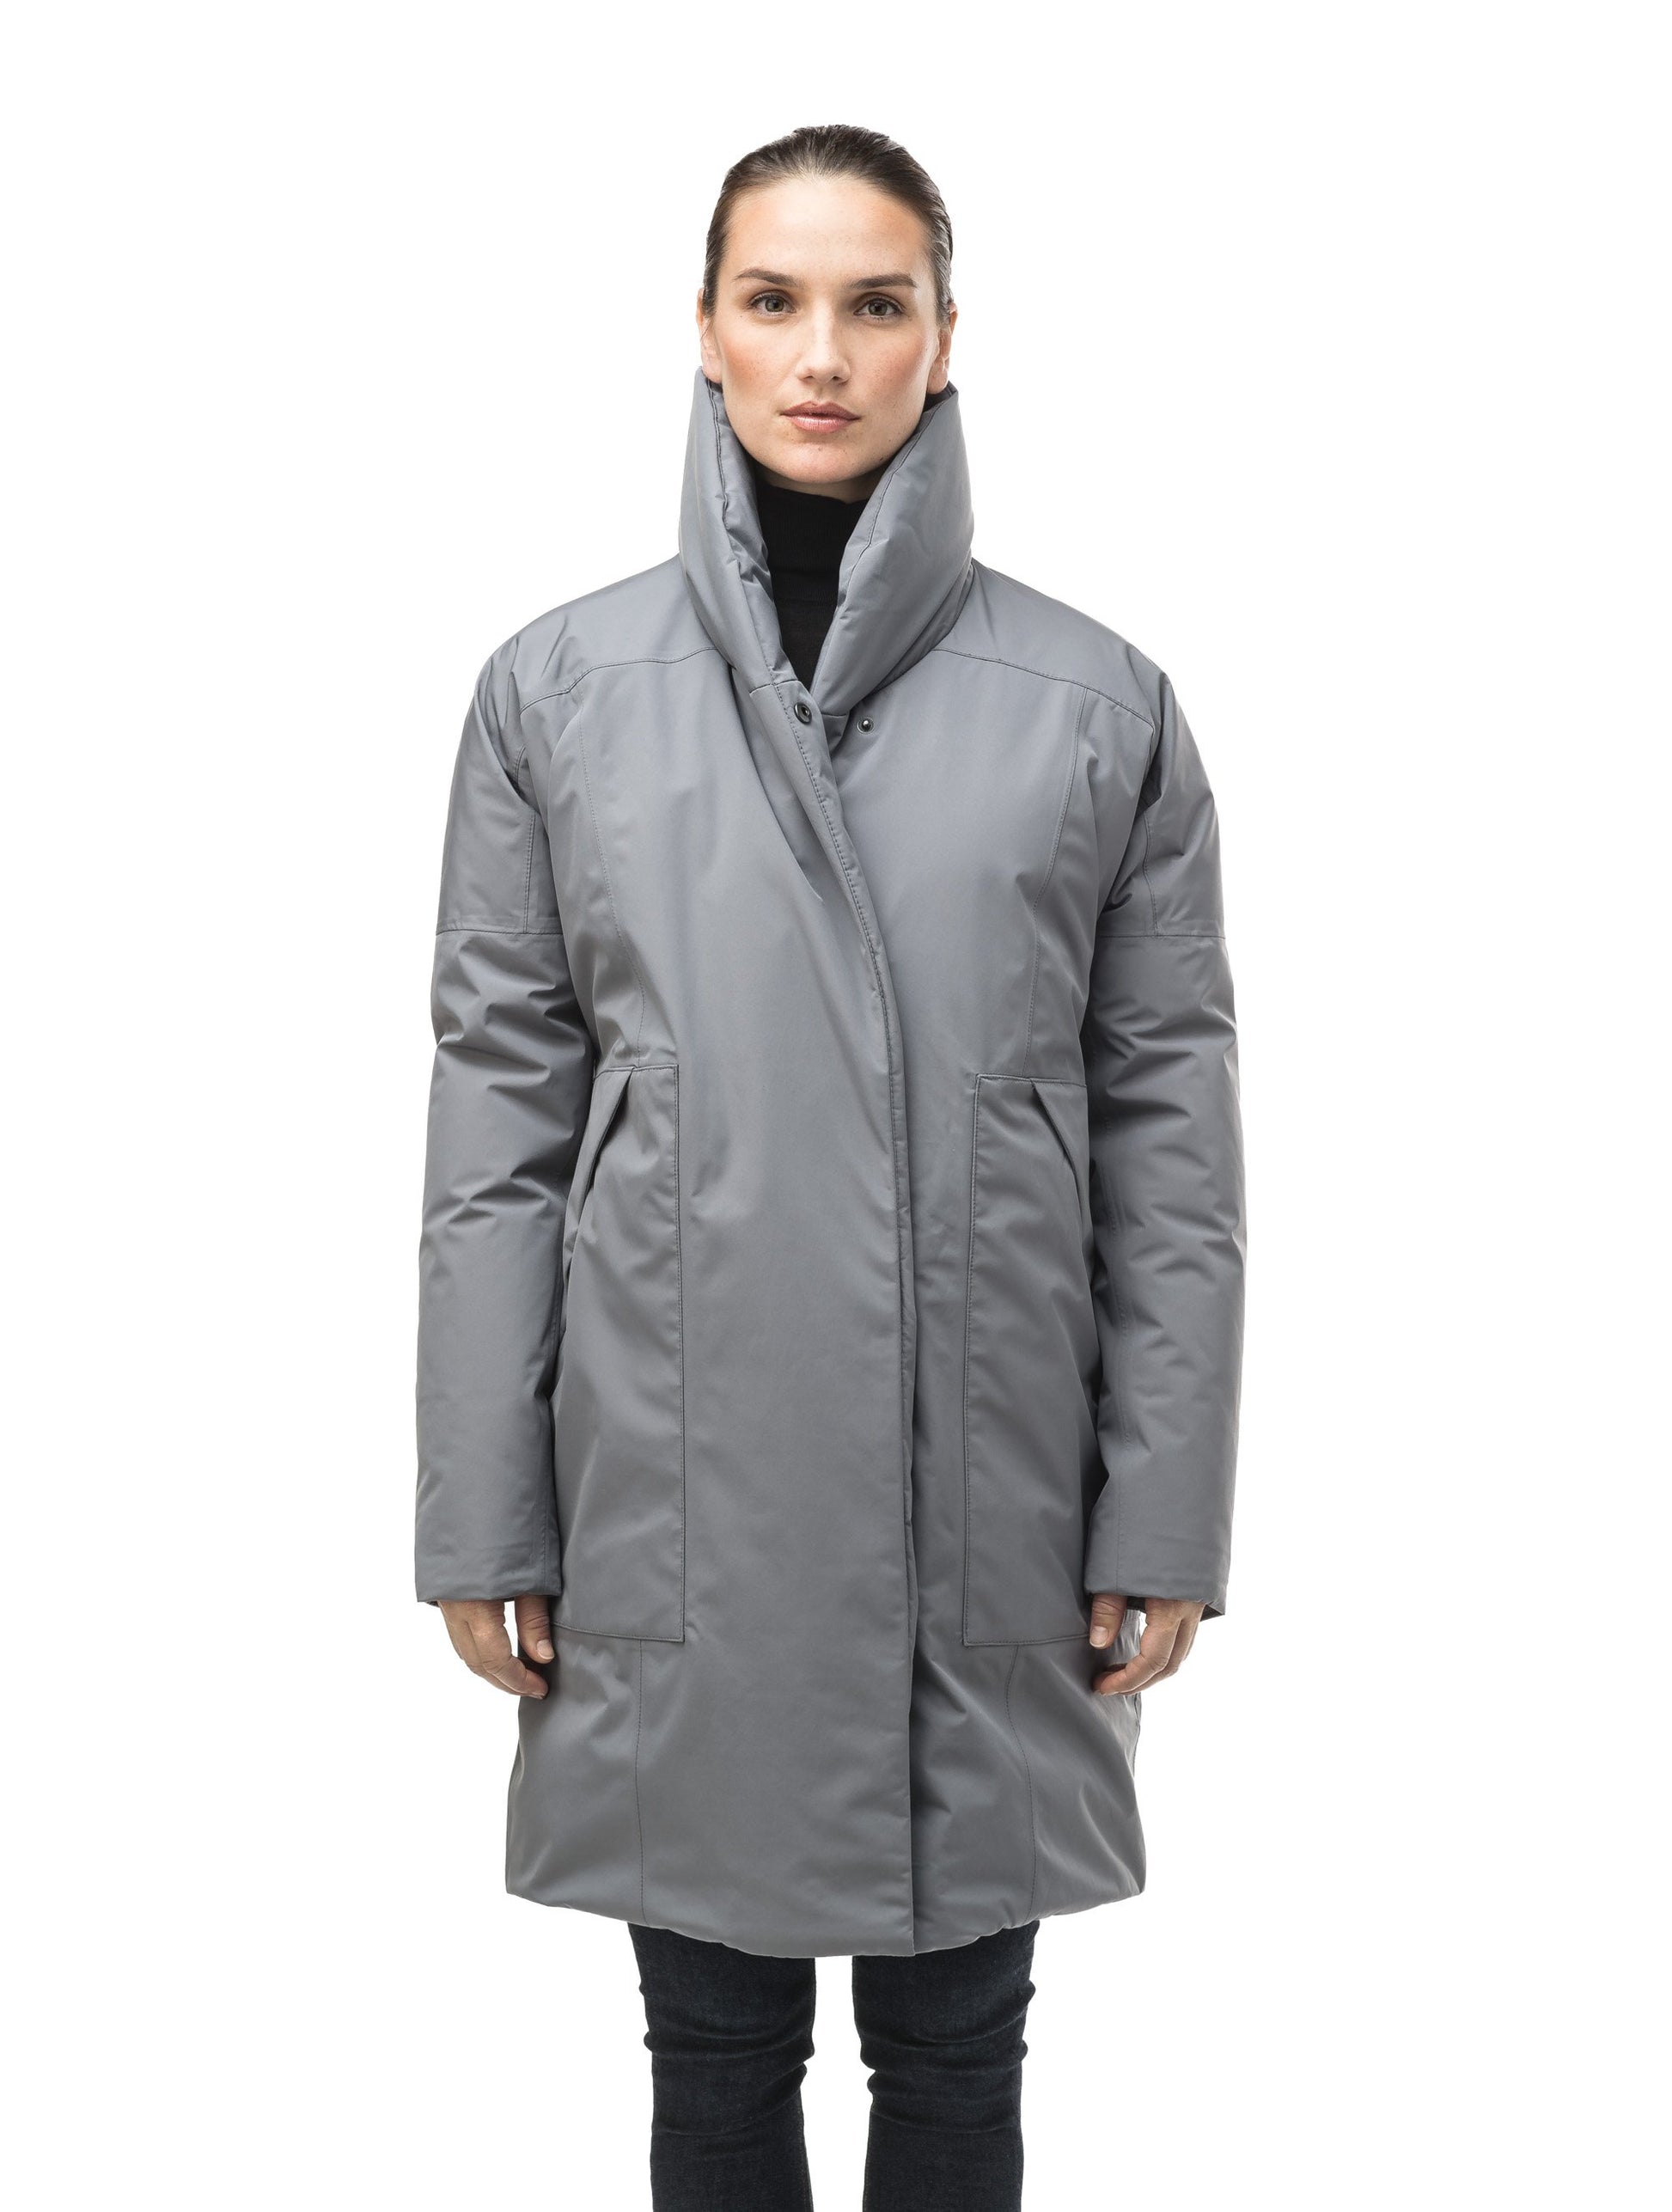 Women's down filled parka with cocoon silhouette and a beautiful shawl collar in Concrete